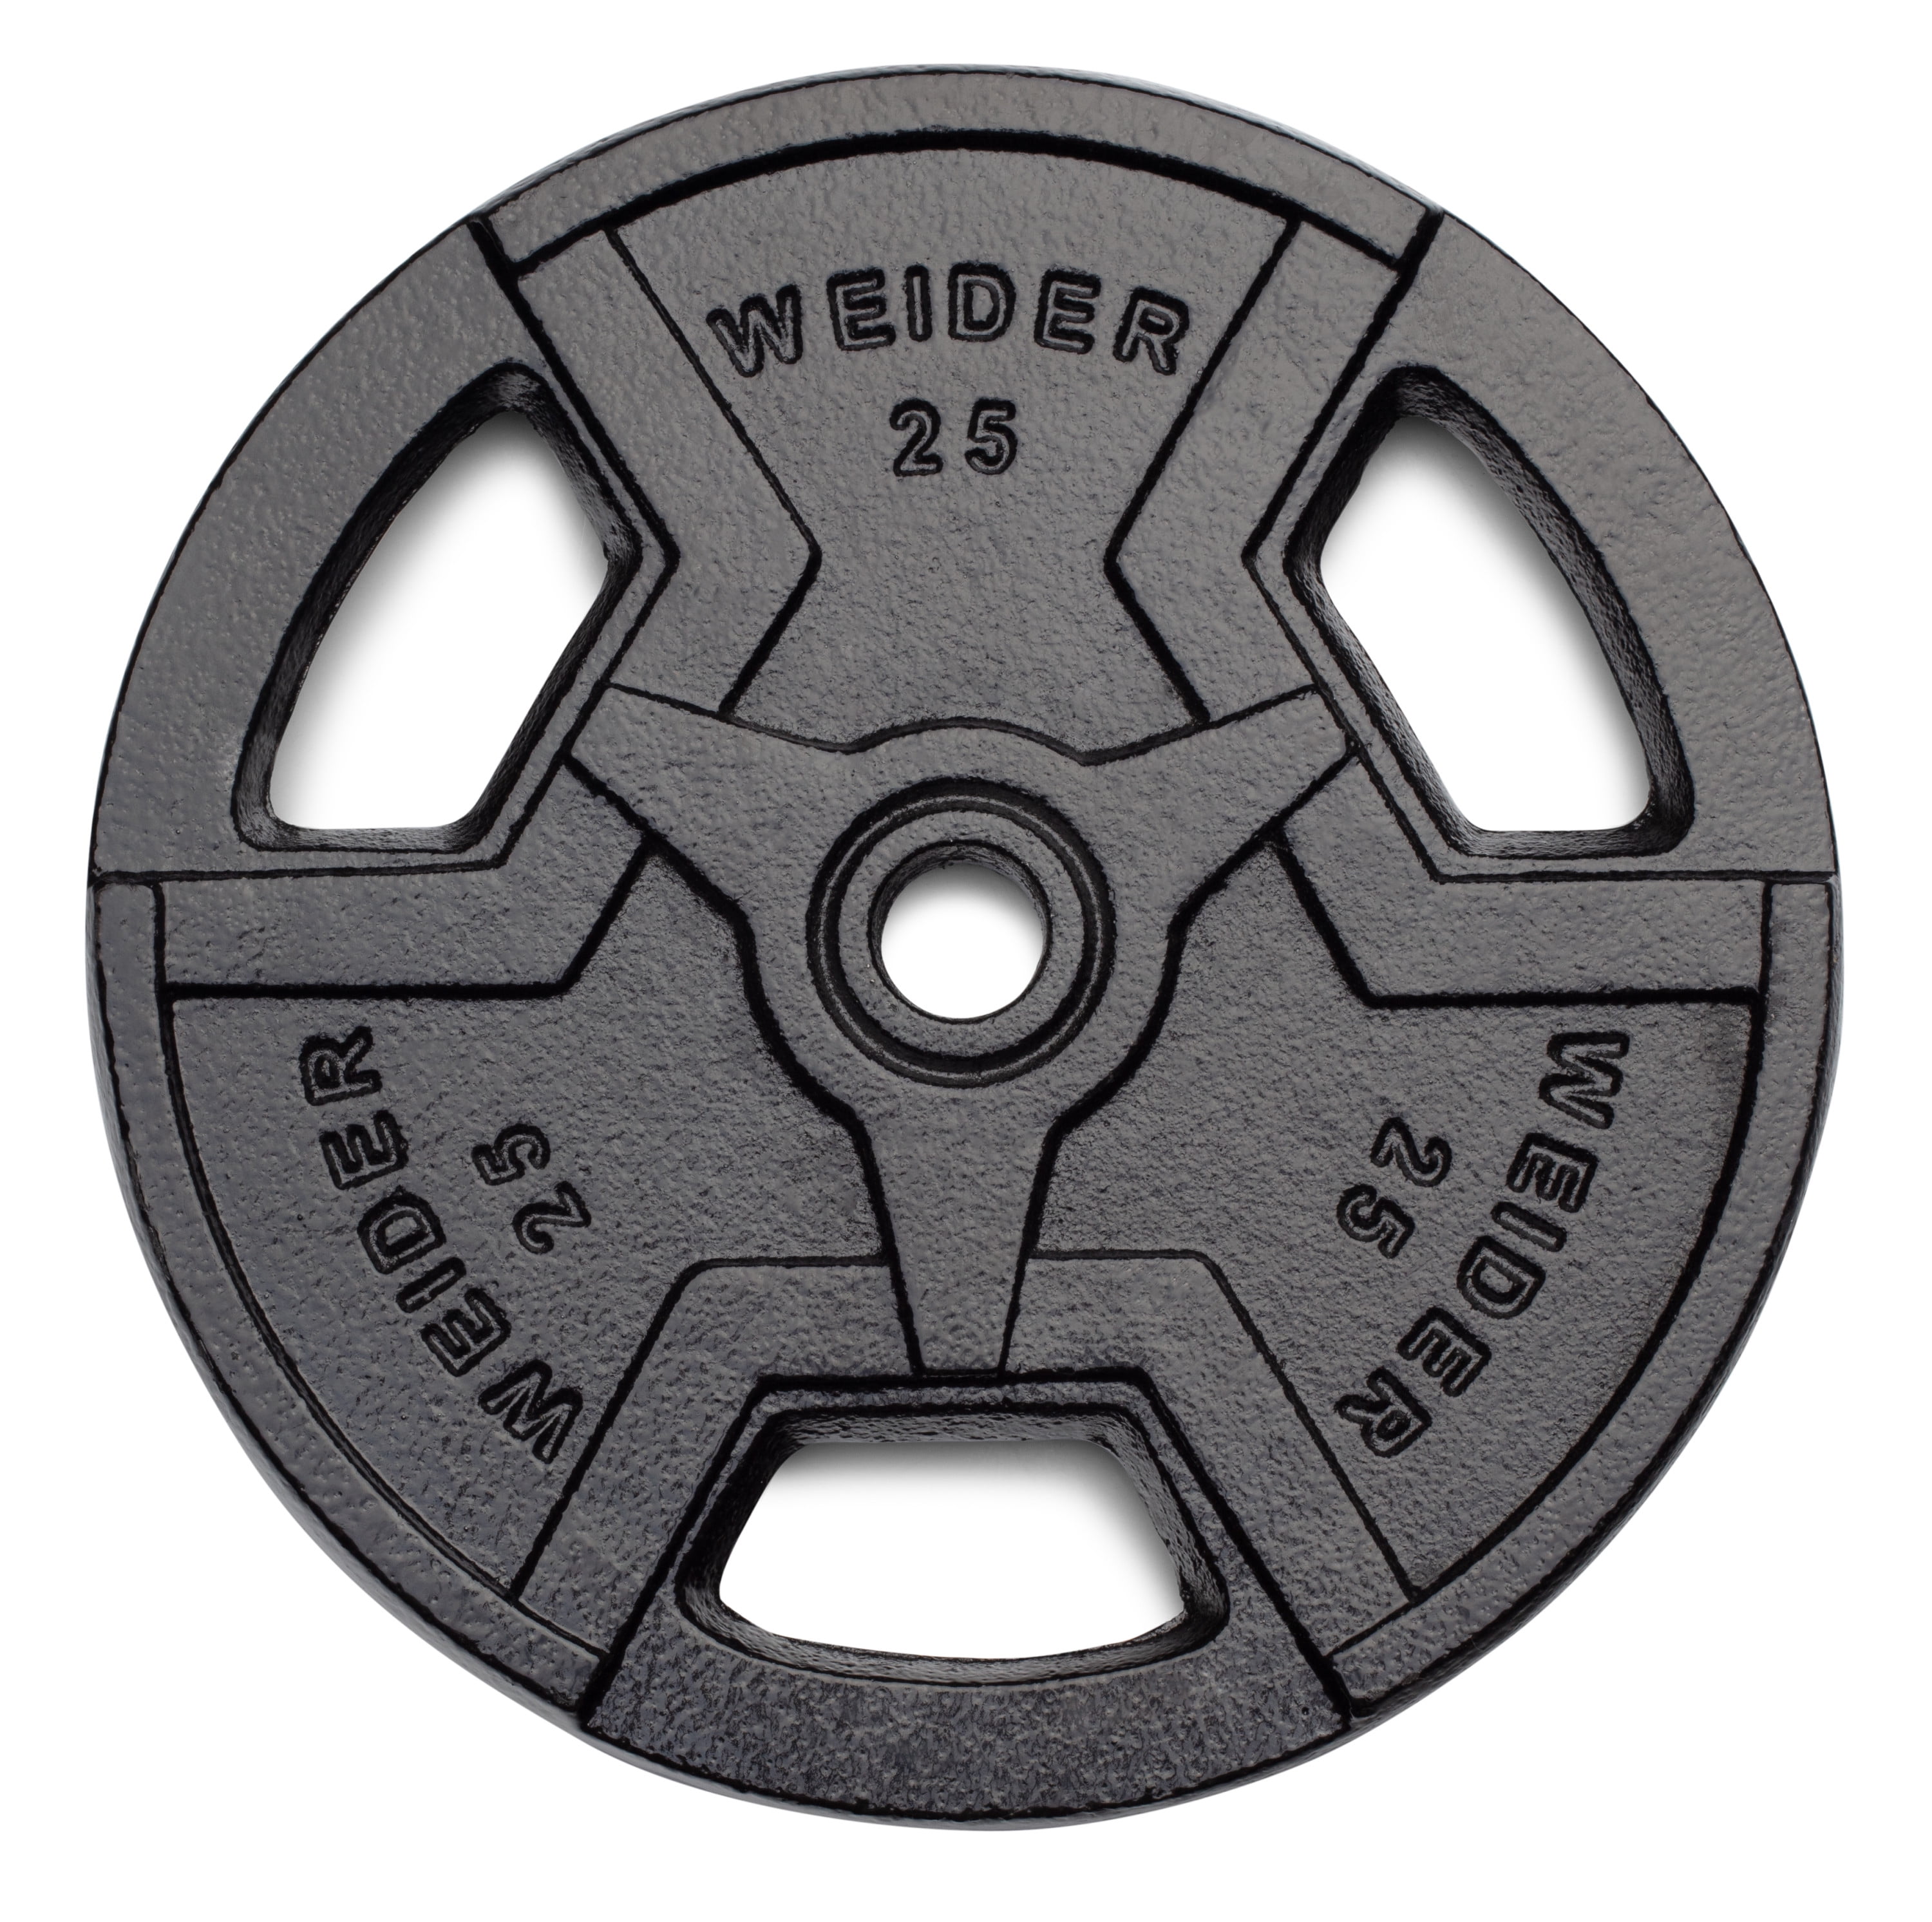 STANDARD 1" HOLE WEIDER BRAND WEIGHT PLATES ONE PAIR OF 2.5 LB 